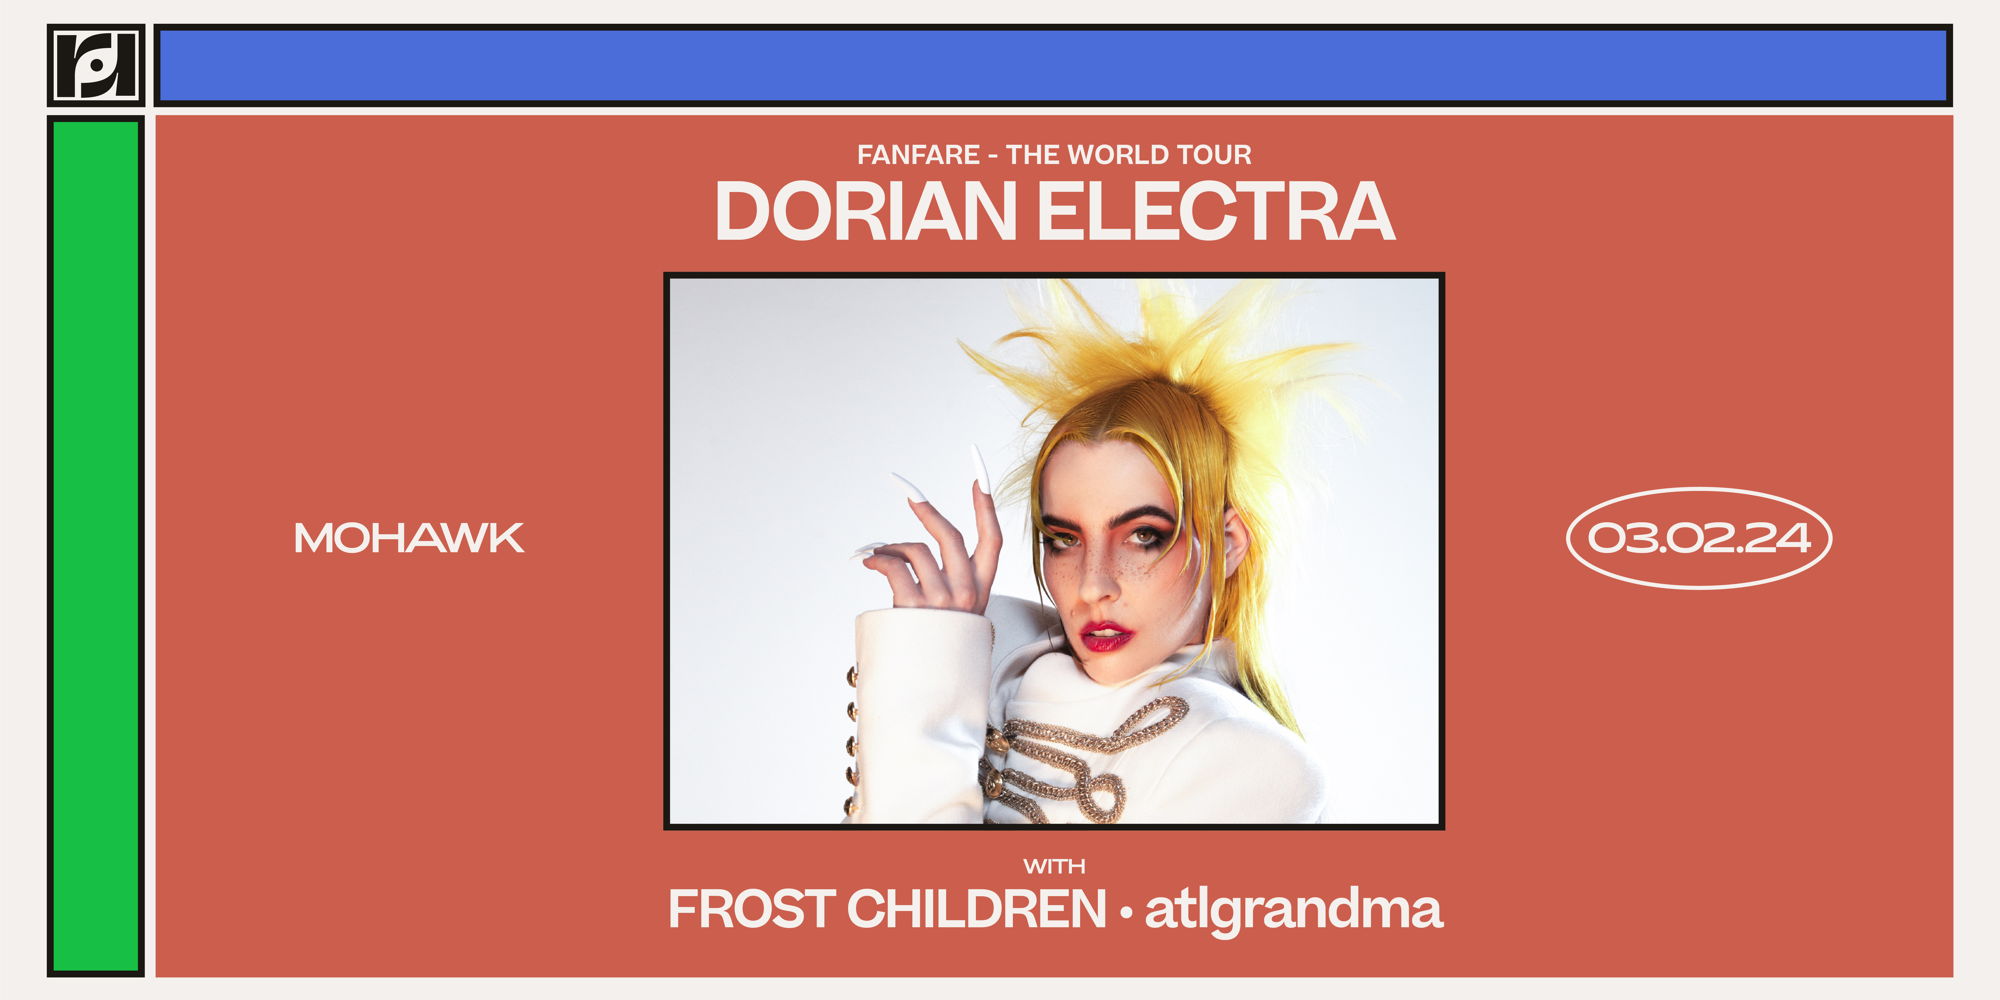 Resound Presents: Dorian Electra presents Fanfare - The World Tour w/ Frost Children and atlgrandma at Mohawk promotional image